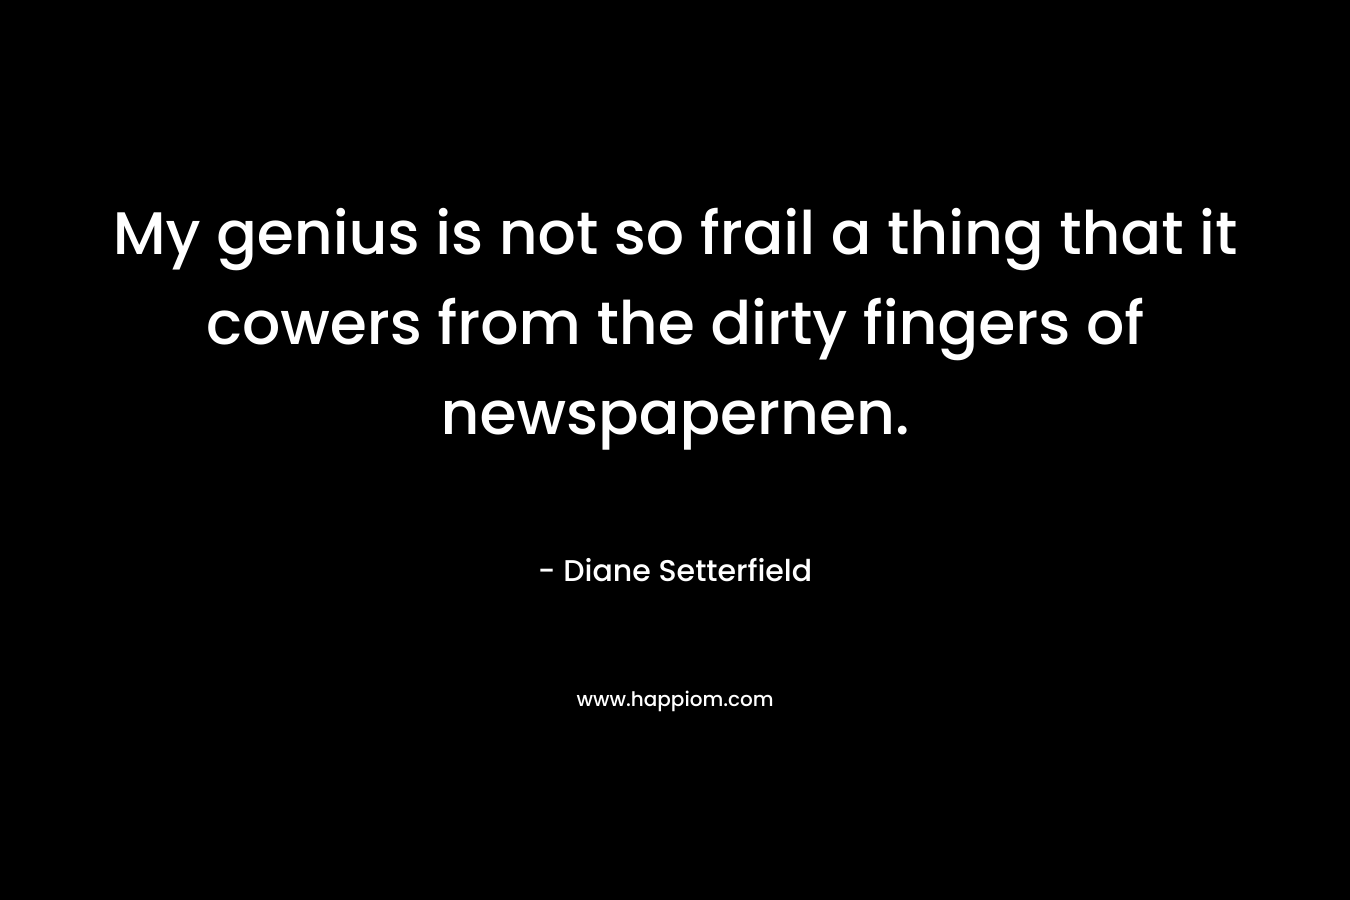 My genius is not so frail a thing that it cowers from the dirty fingers of newspapernen. – Diane Setterfield